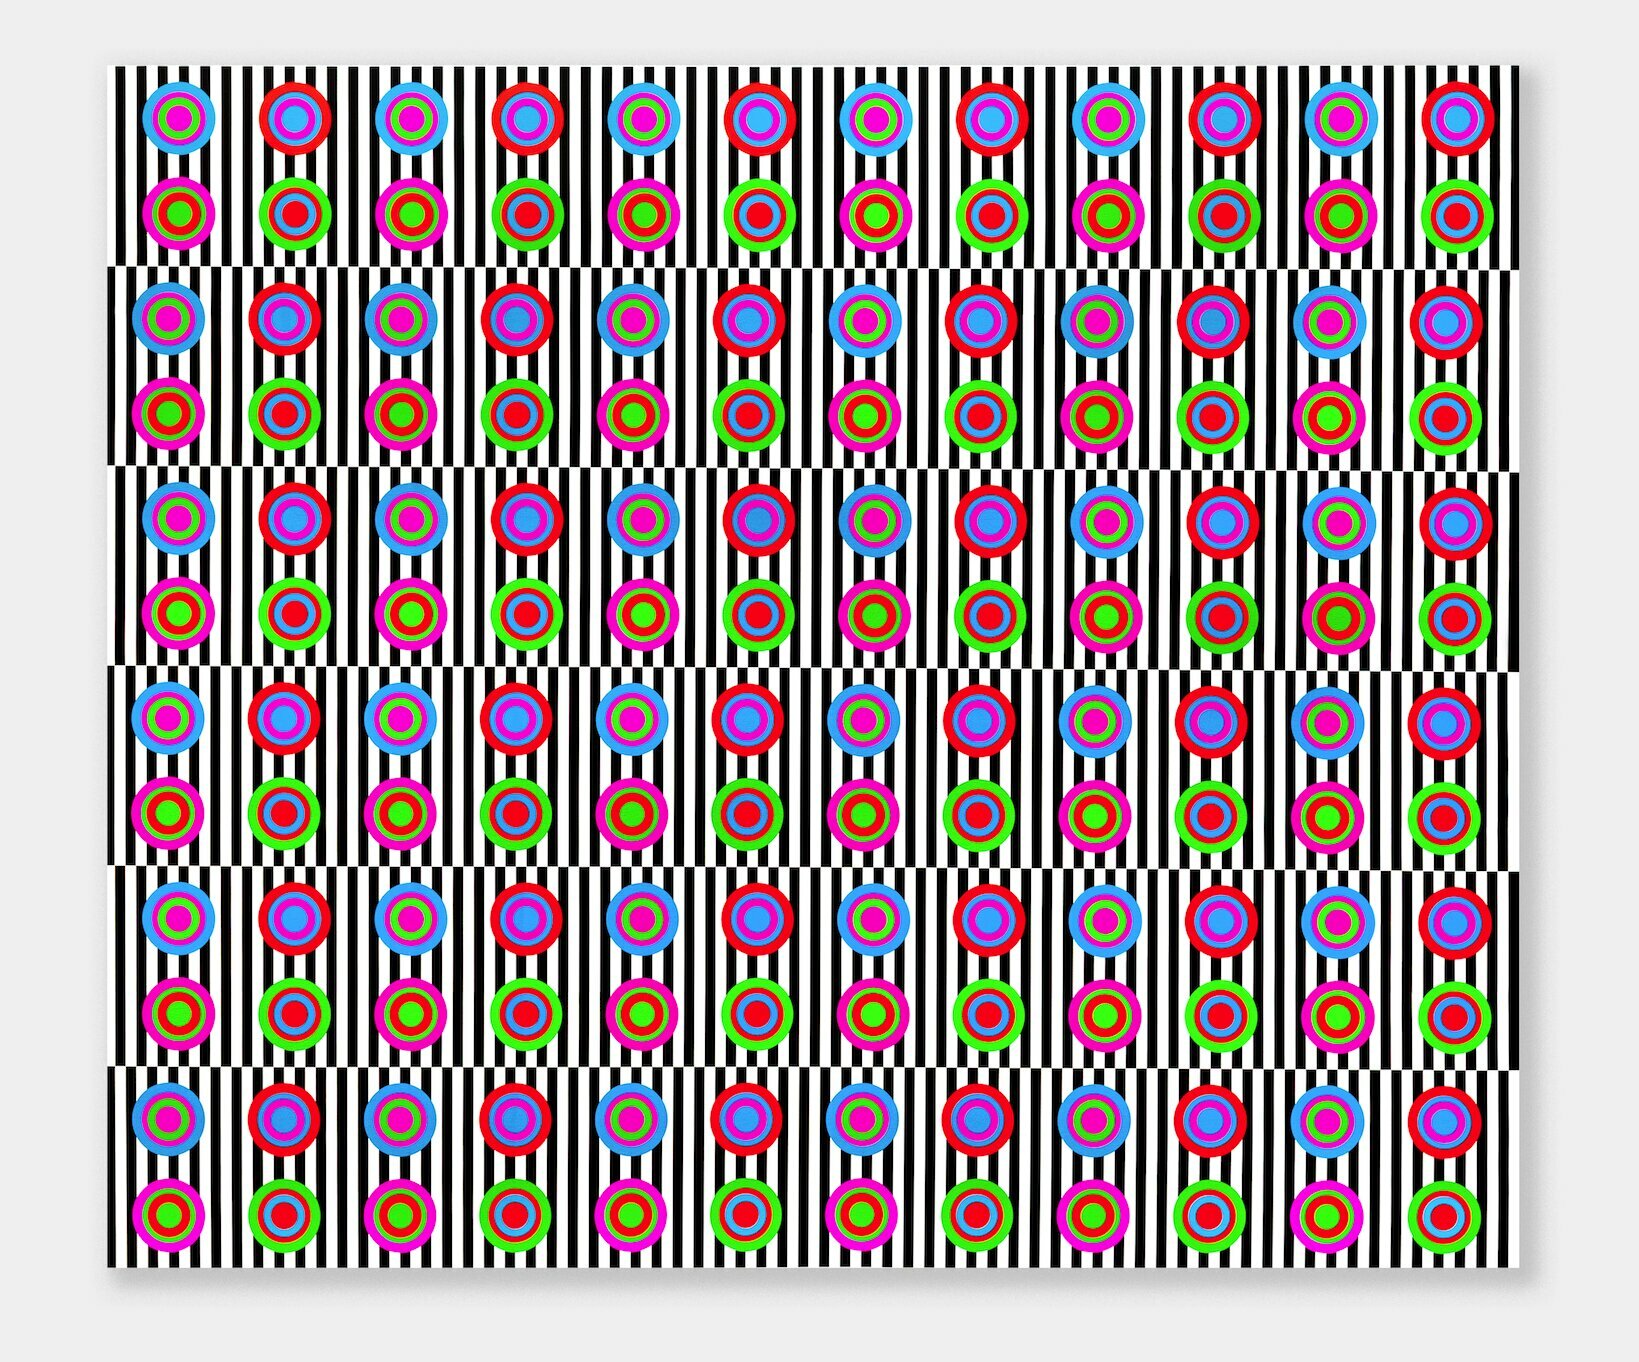 Youri Messen-Jaschin; Quantique, 2022, Original Printmaking Serigraph, 170 x 200 cm. Artwork description: 241 Op art - Optical art - Edition One print1 1 - Silkscreen on linen canvas A(c) 2022 Youri Messen- Jaschin A(r) Prolitteris Zurichm photography @ vincentmullerphotosPackaging, insurance and transport is not included in the price, it is additional.  I work with a carrier, he is responsible for all my shipments.  The costs ...